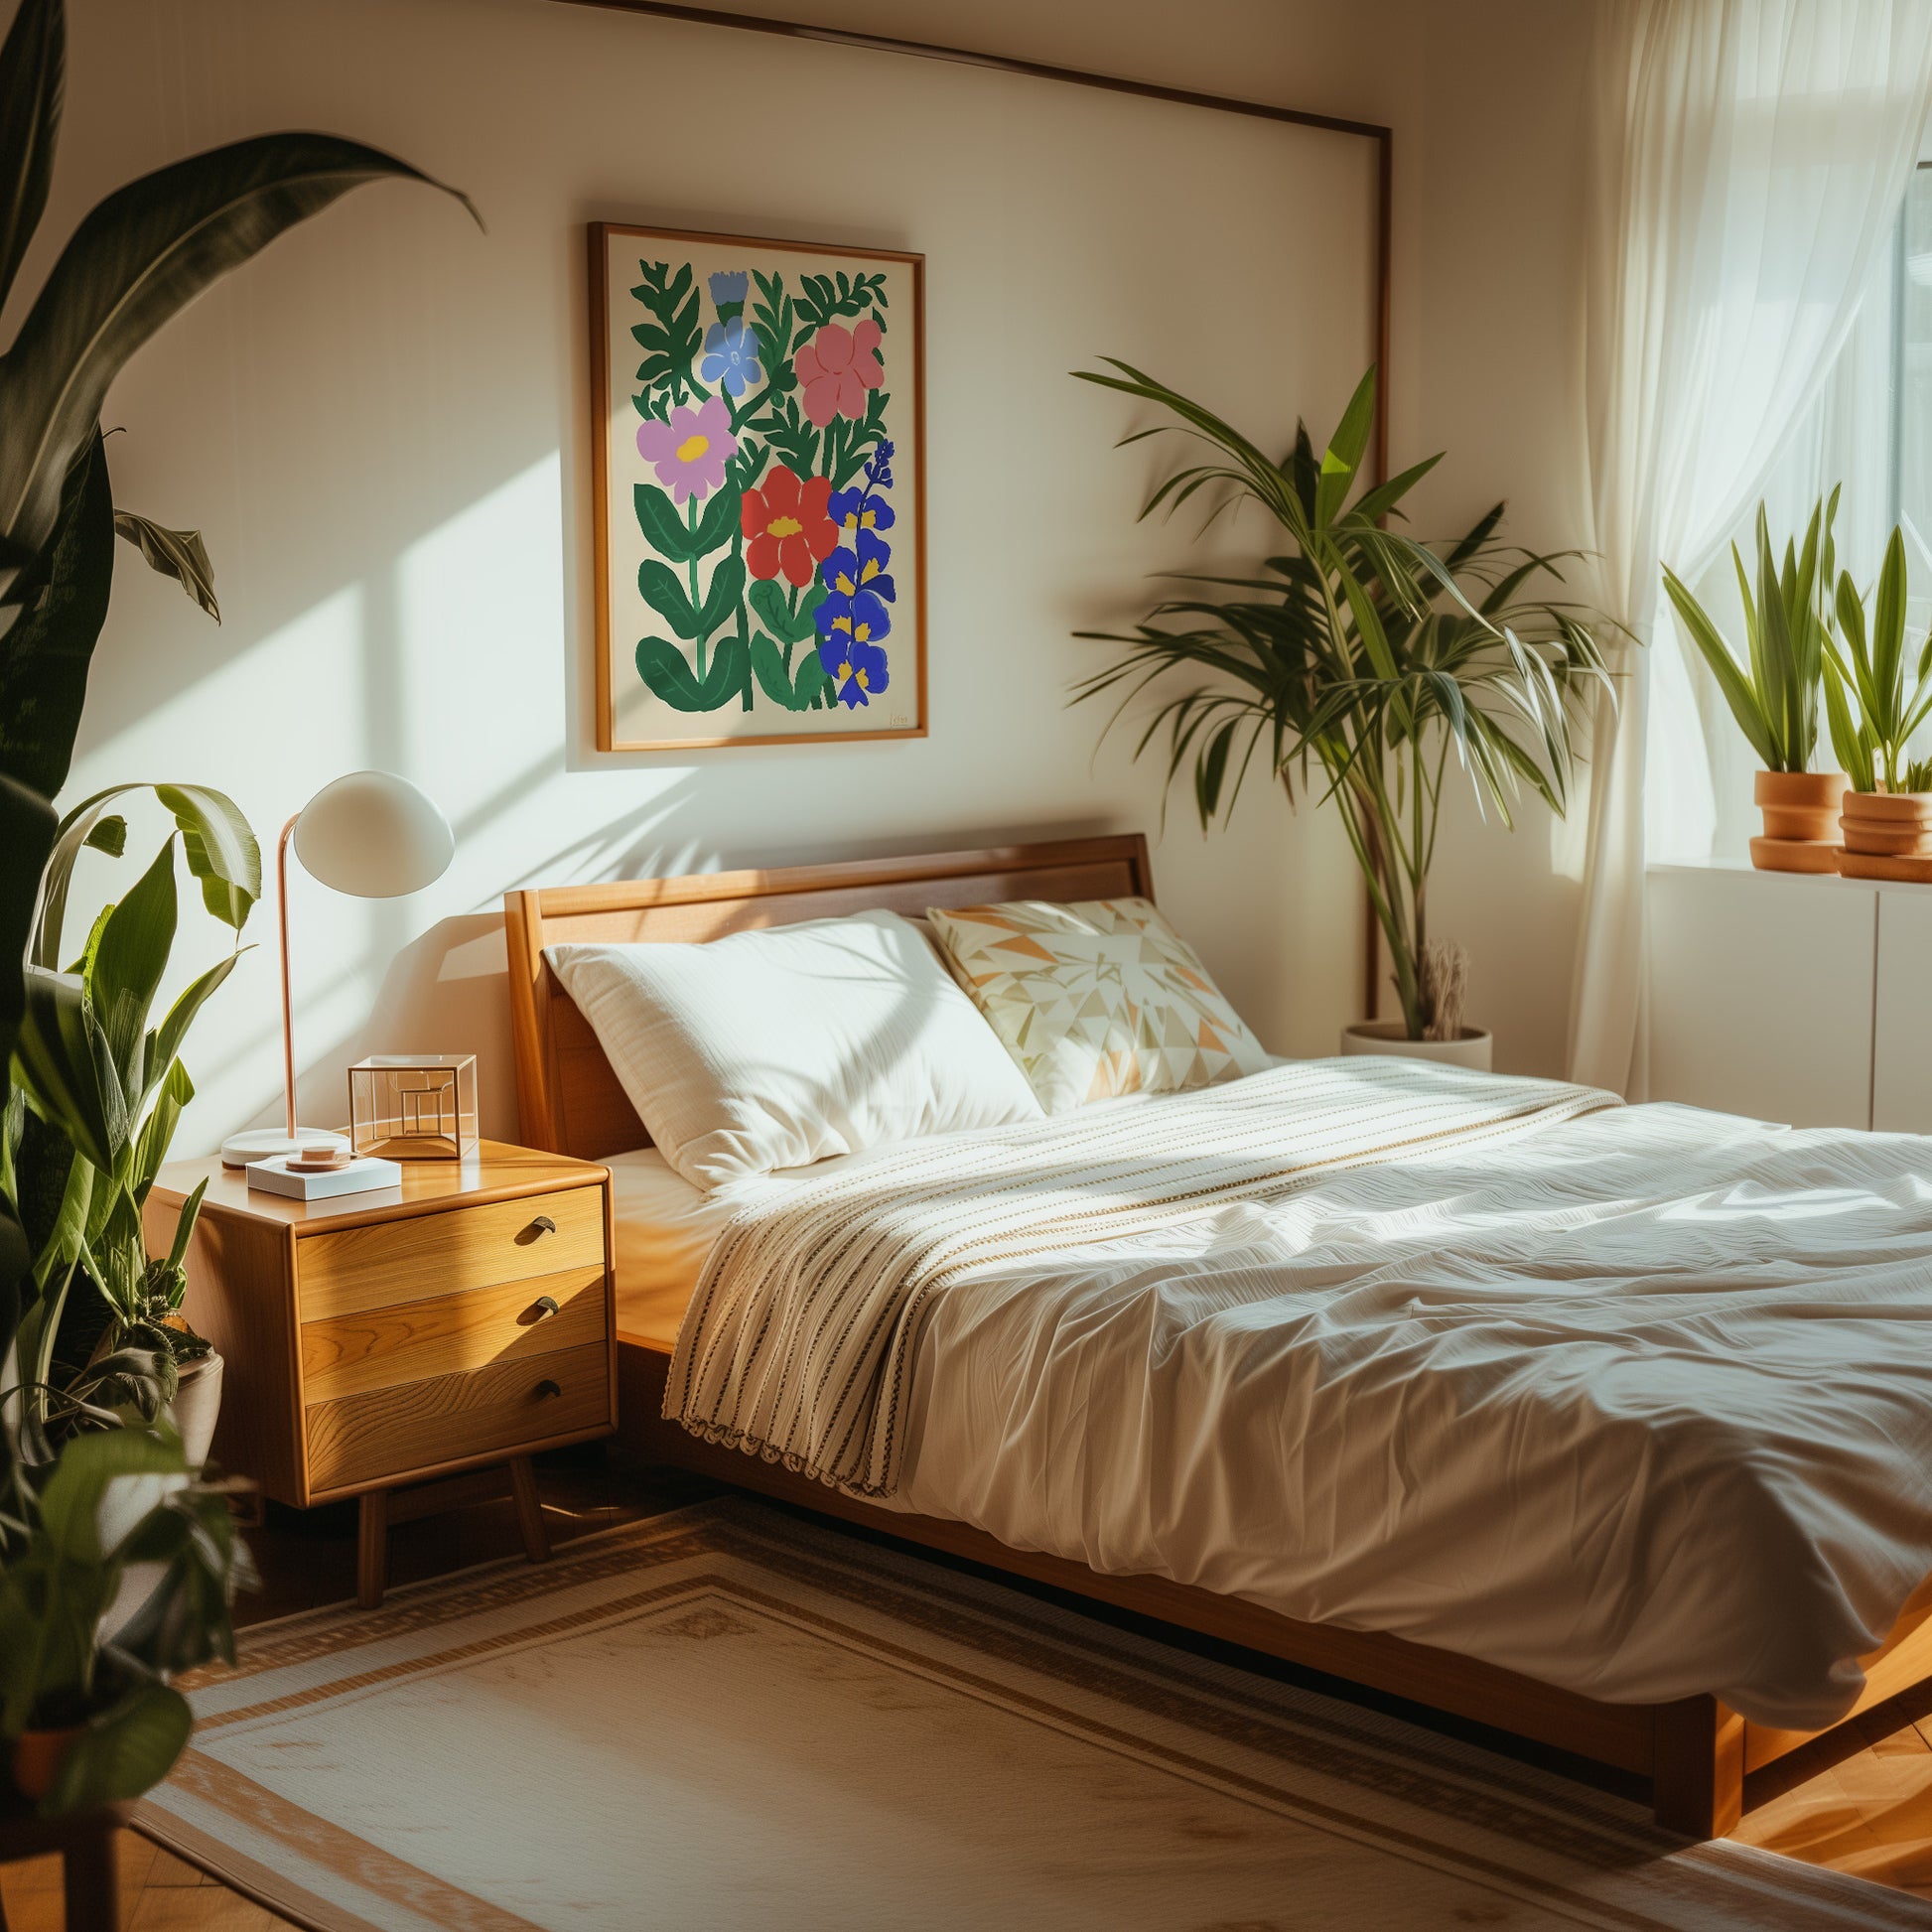 A cozy bedroom with sunlight streaming in, featuring a neat bed and a floral painting on the wall.